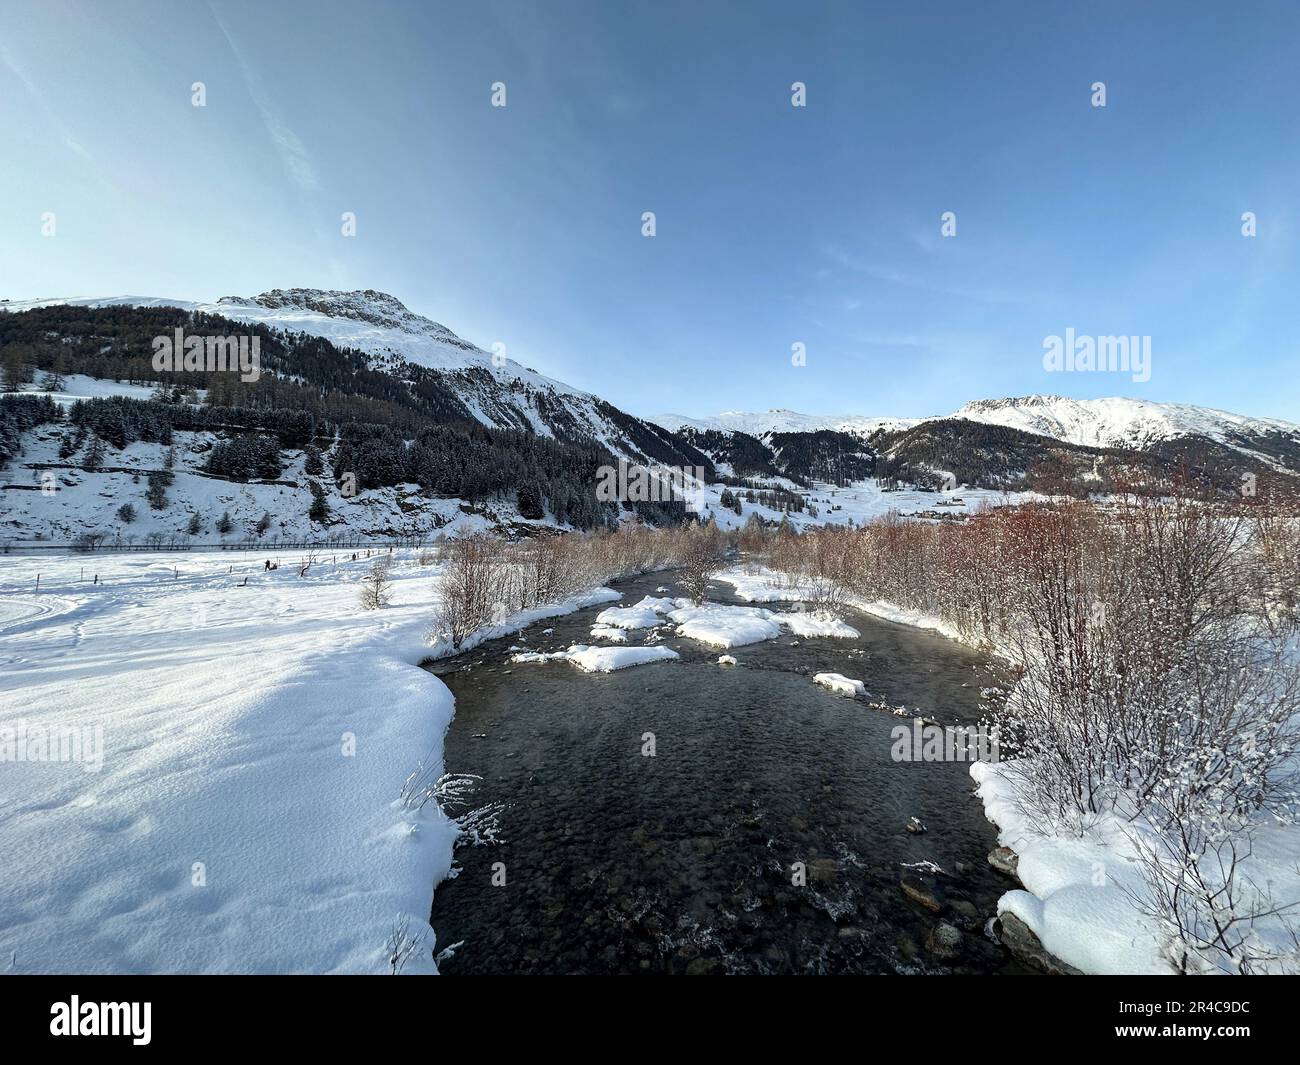 A scenic view of a mountain valley featuring a serene river winding through with patches of snow covering the landscape Stock Photo